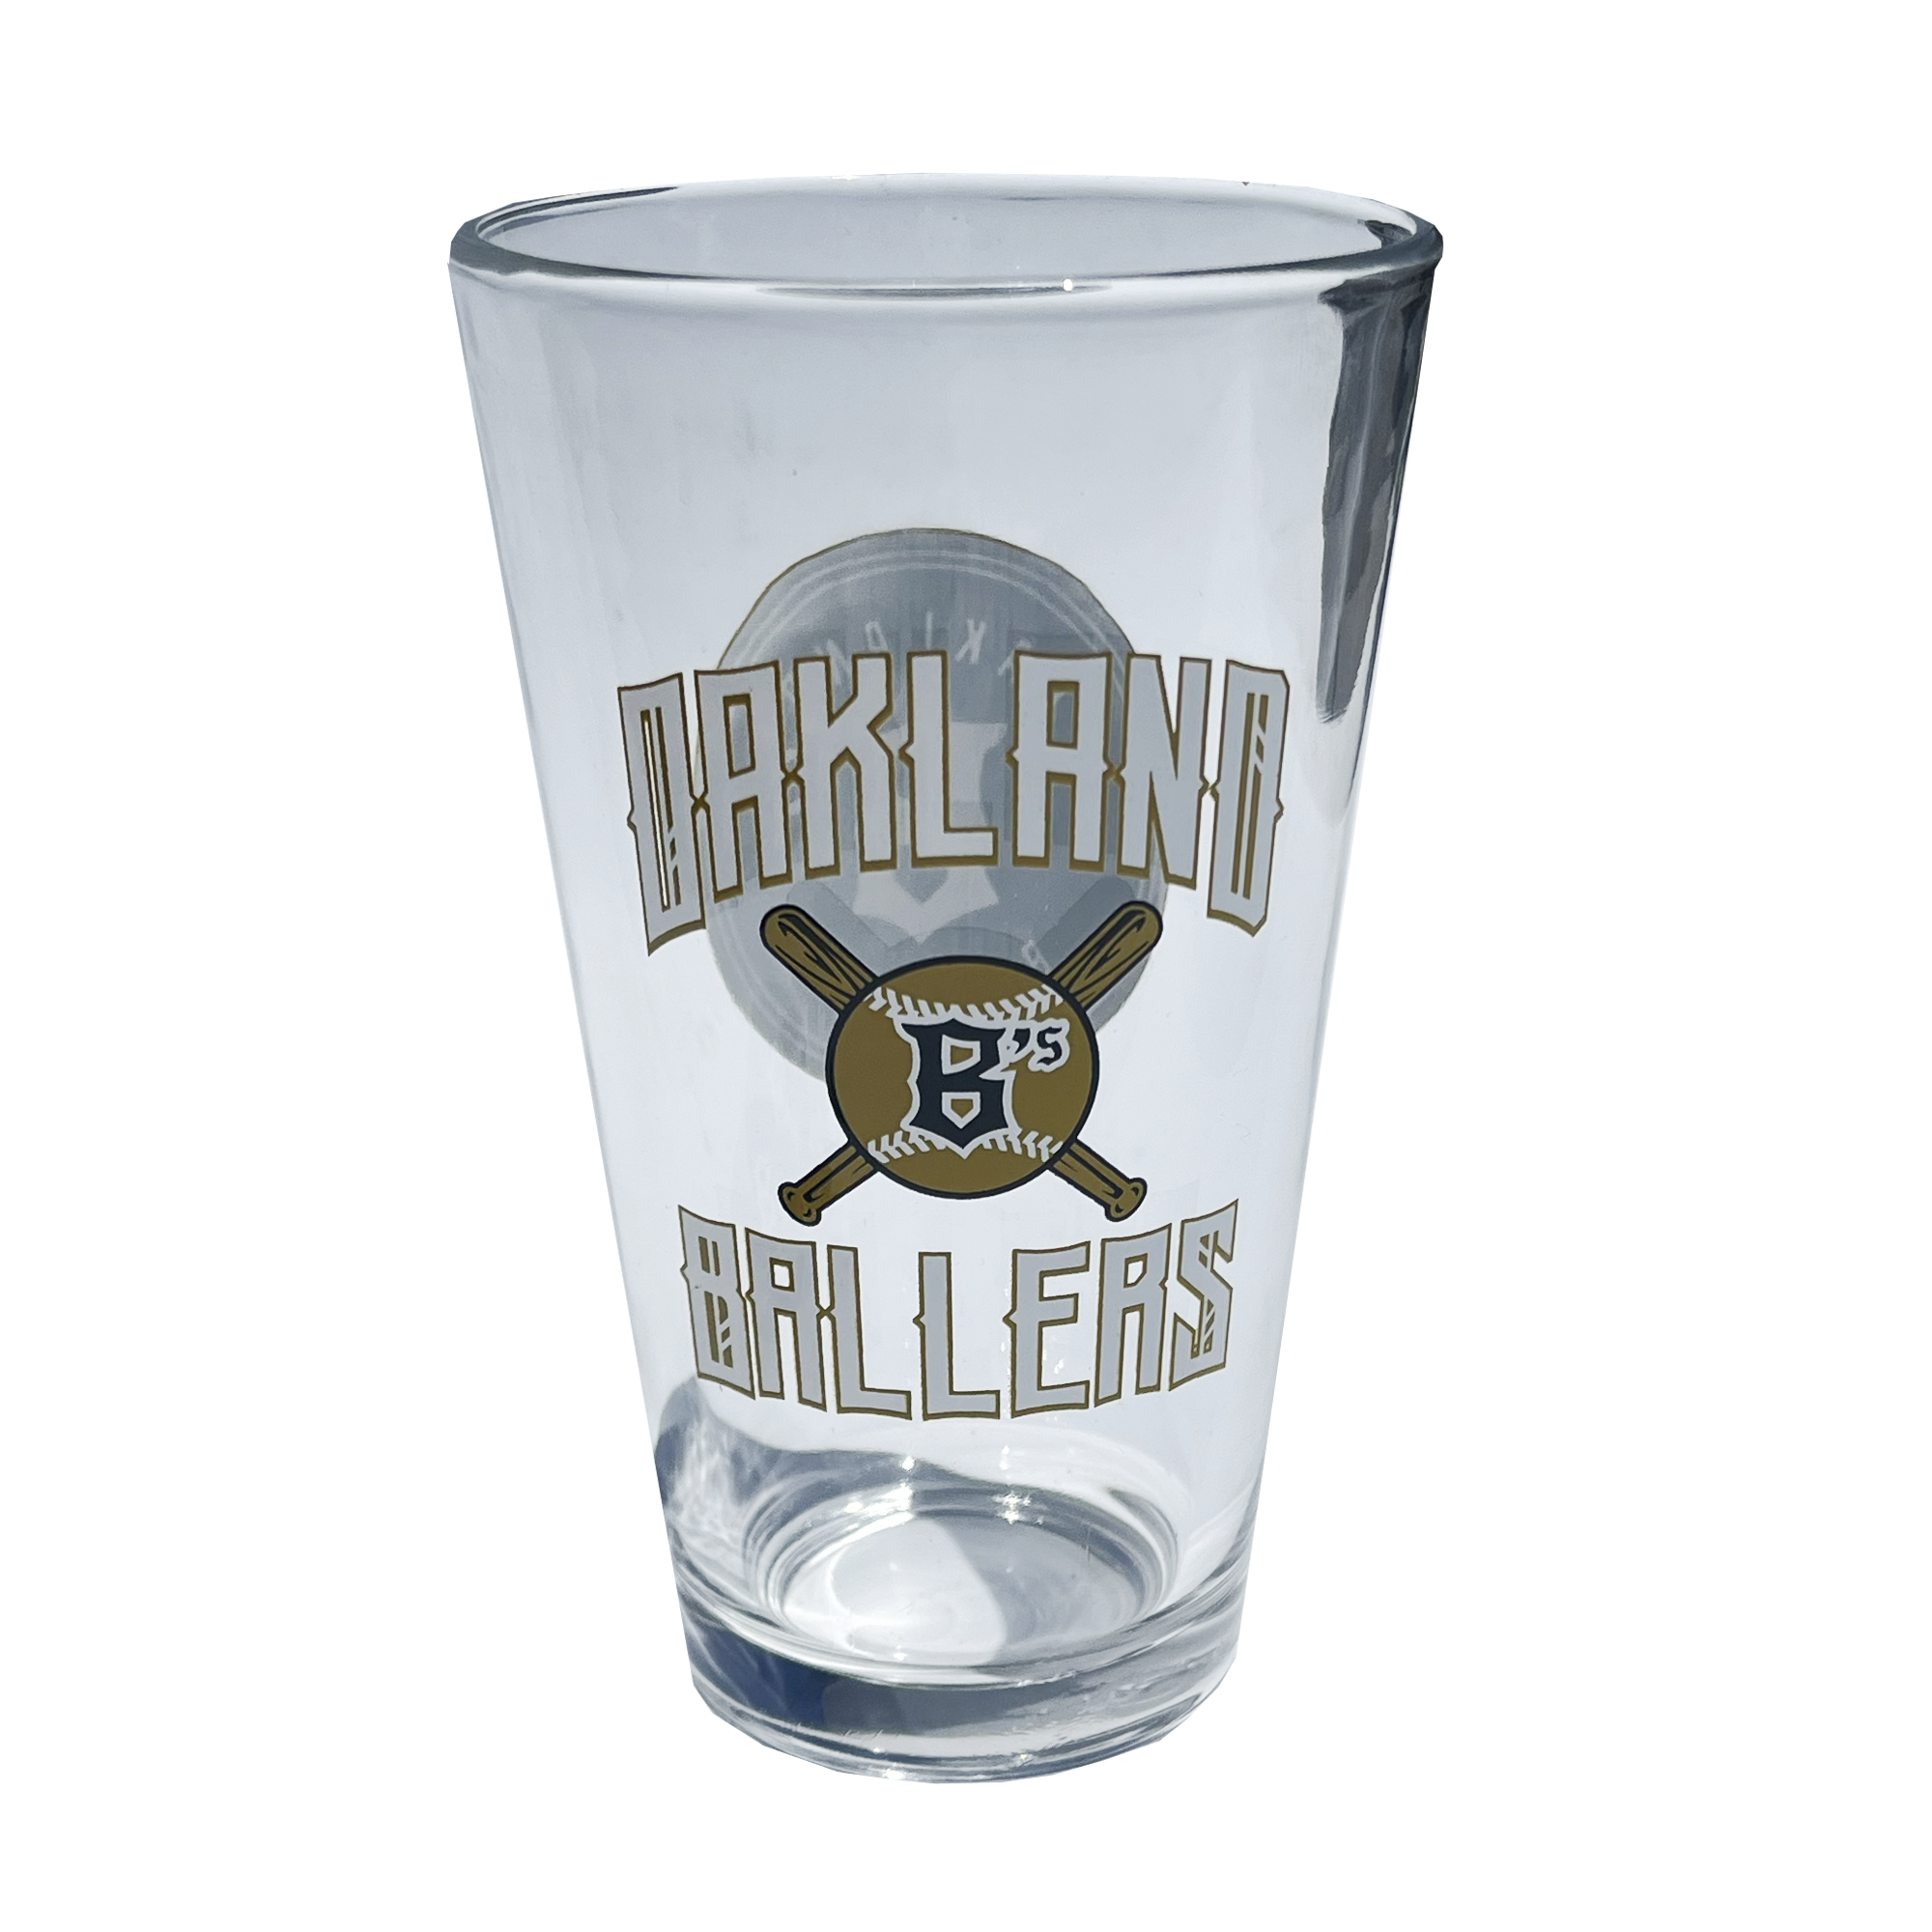 Reverse side of pint glass with Oakland Ballers baseball design.